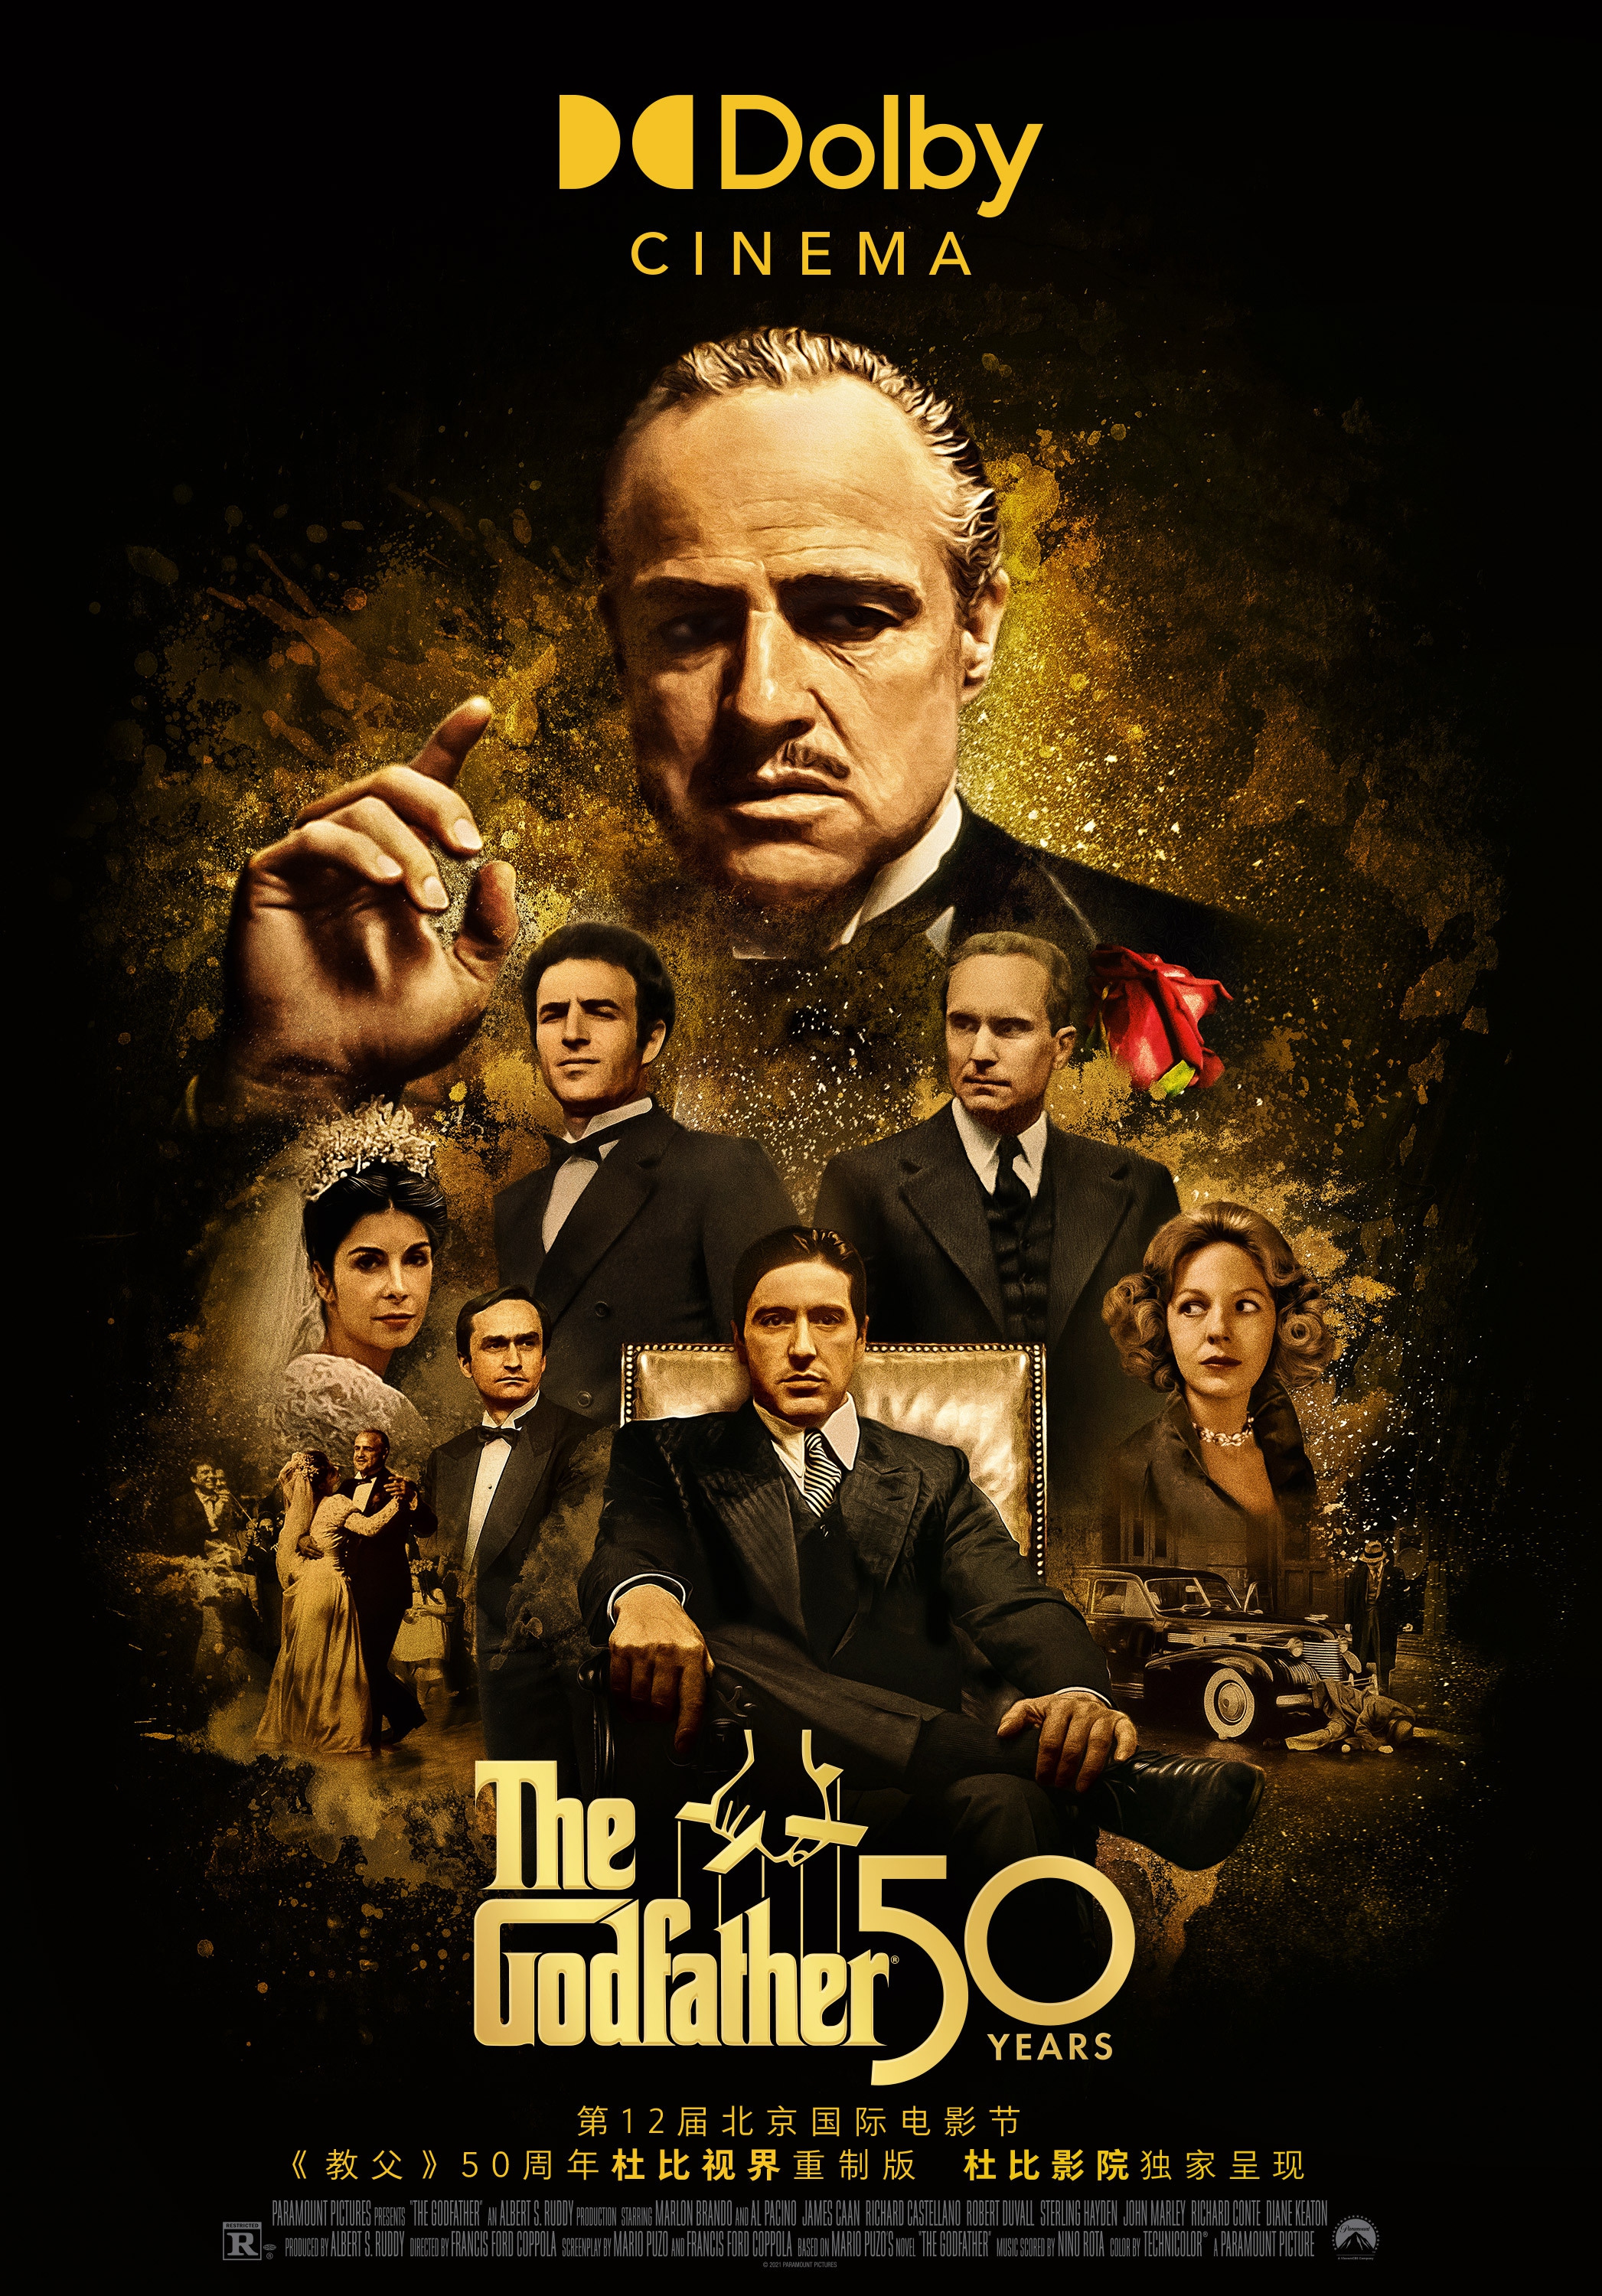 Poster of The God Father Photo: Sina Weibo